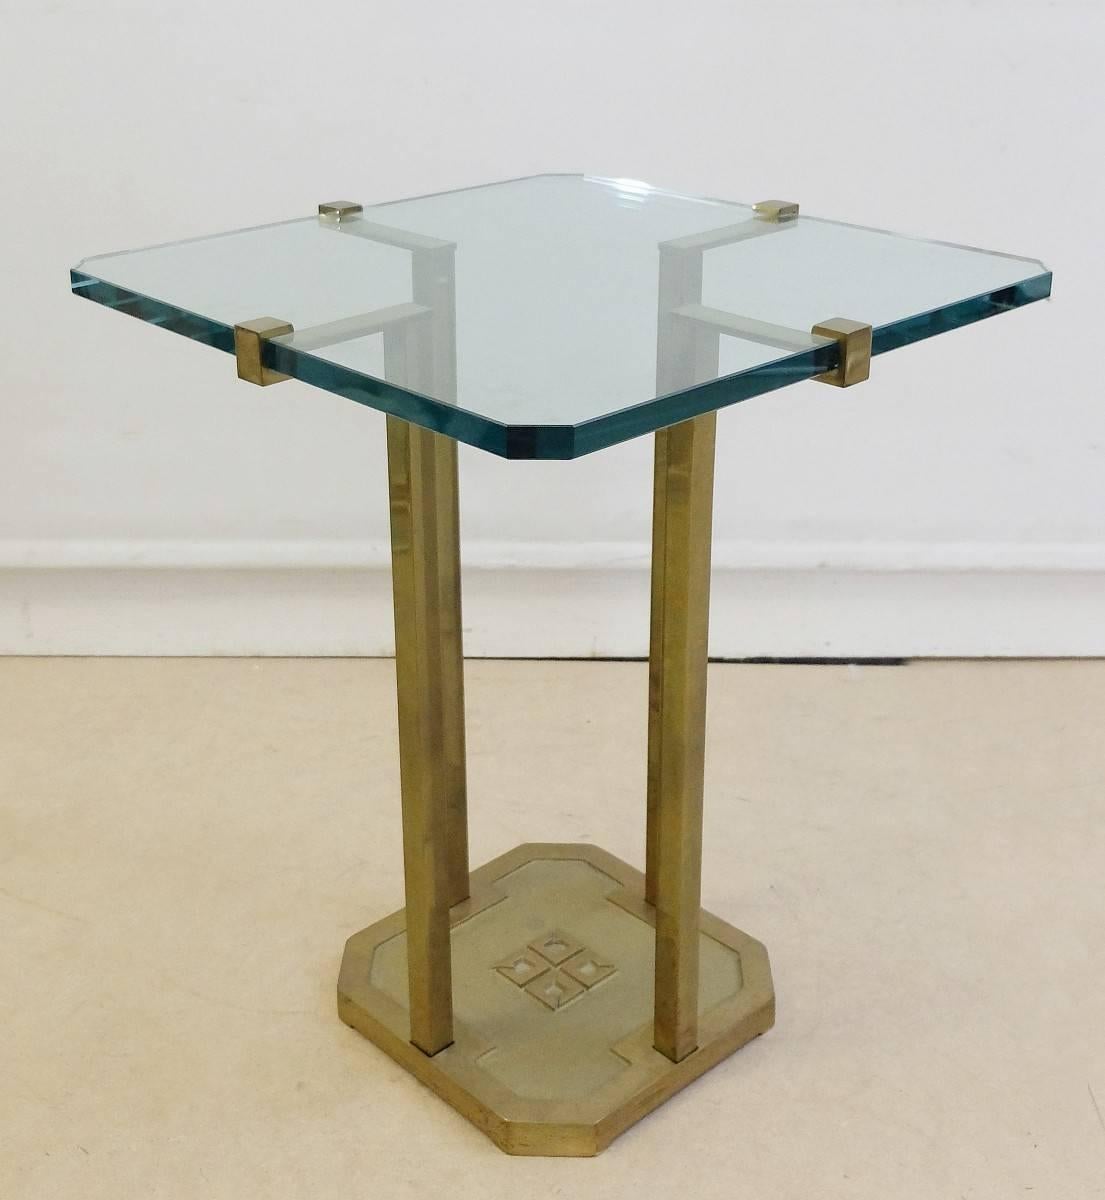 Pair of two side tables in brass with tray in glass. Designed by Peter Ghyczy.